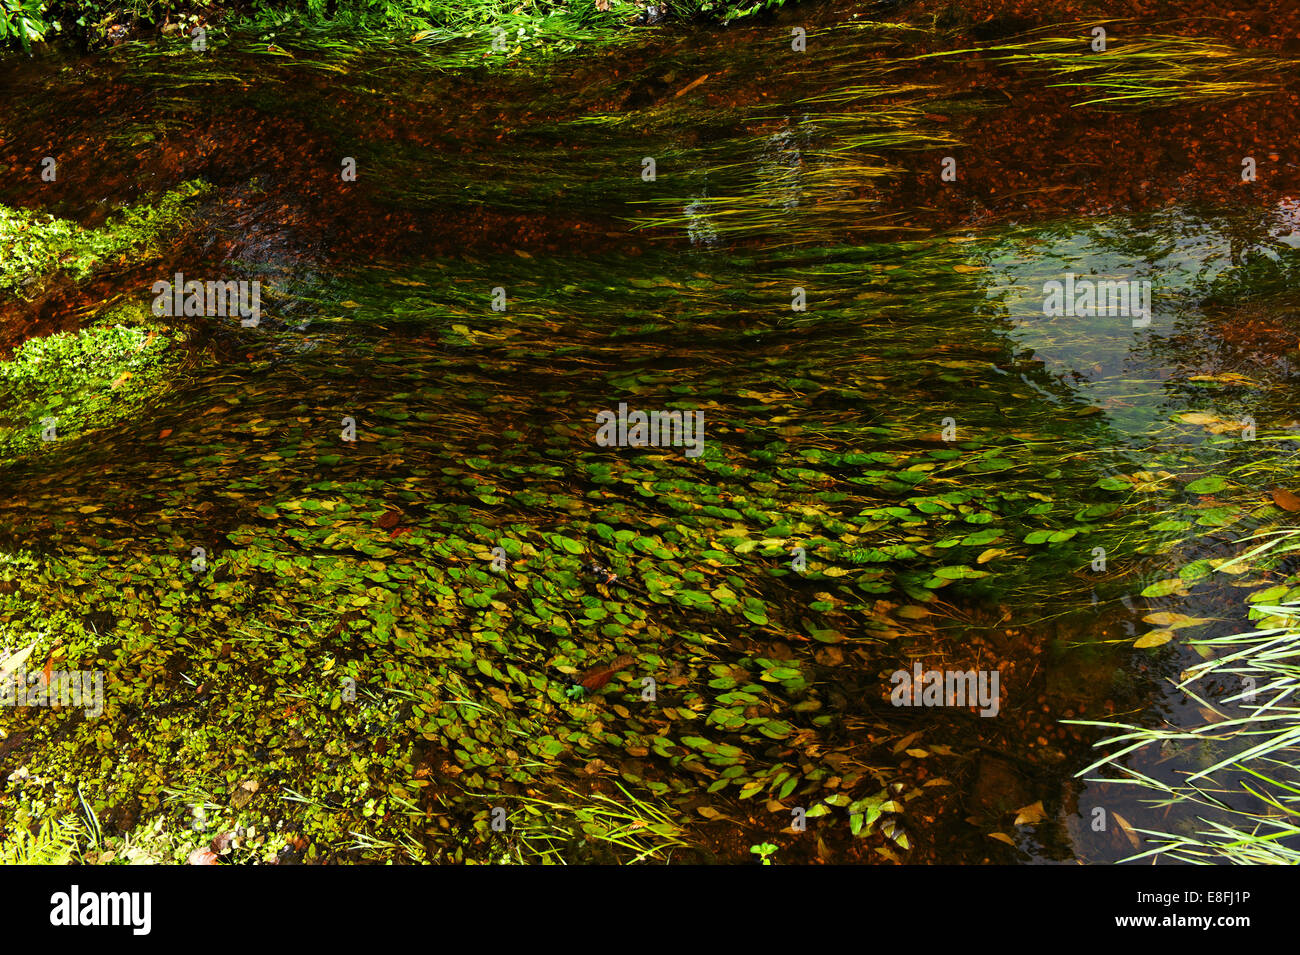 UK, England, Hampshire, New Forest National Park, Stream, flowing water and grass Stock Photo